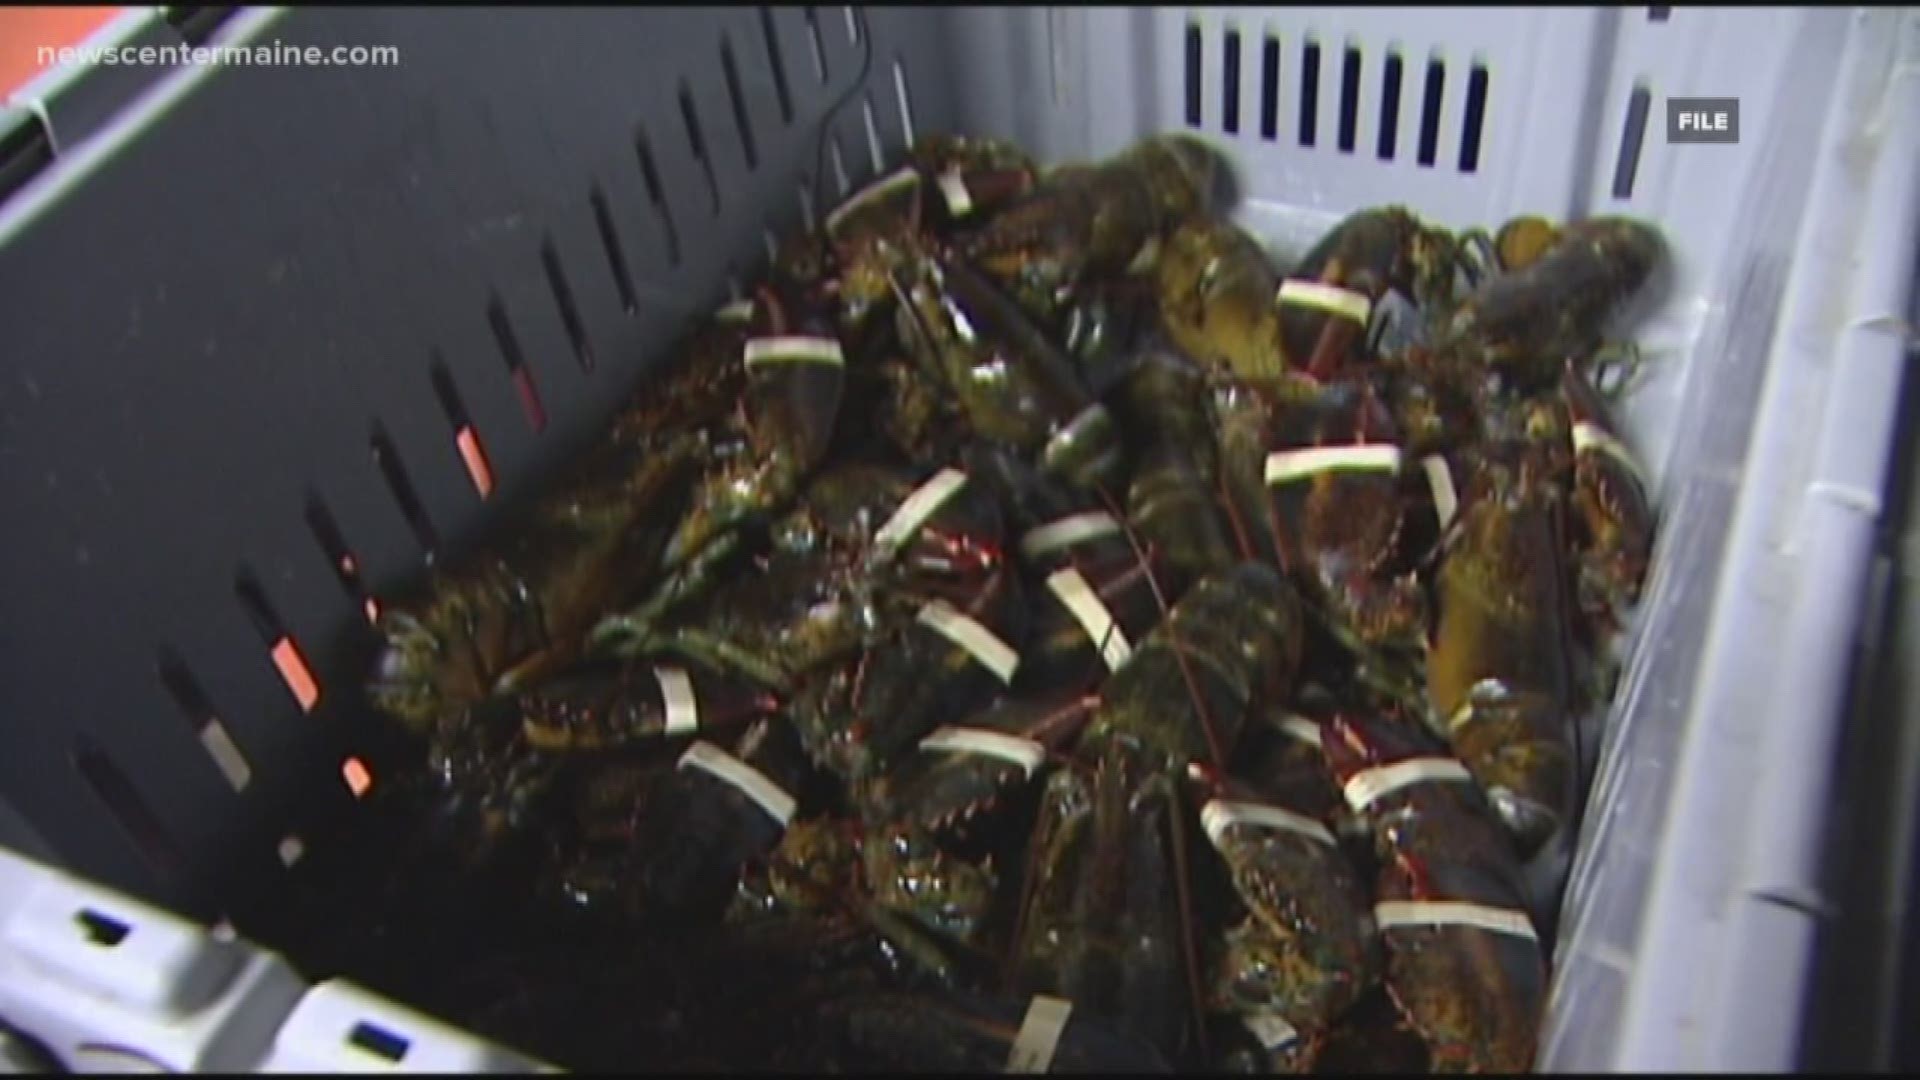 National Lobster Day in Maine